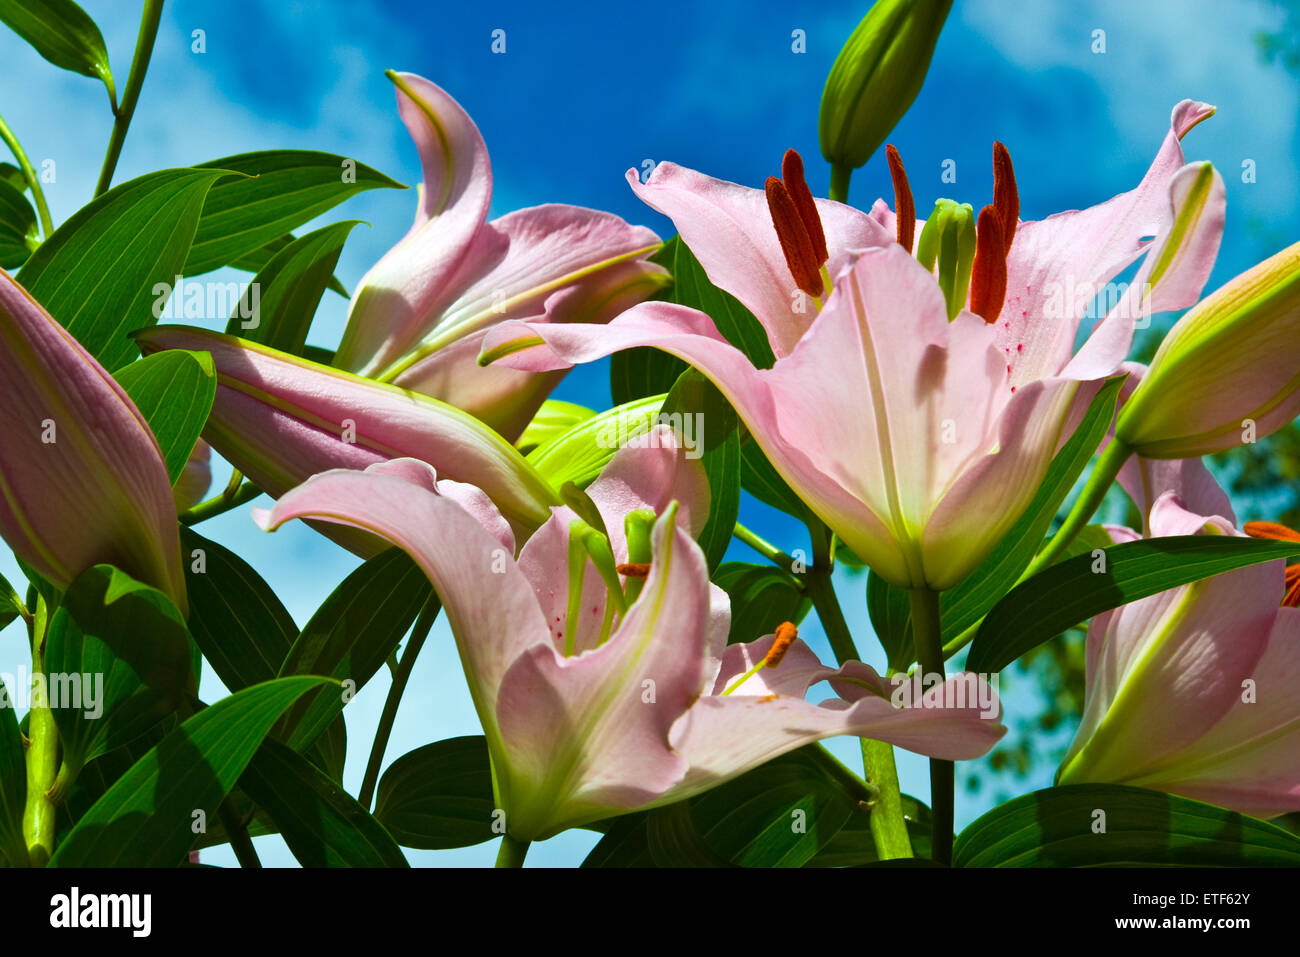 Lilies in the garden Stock Photo